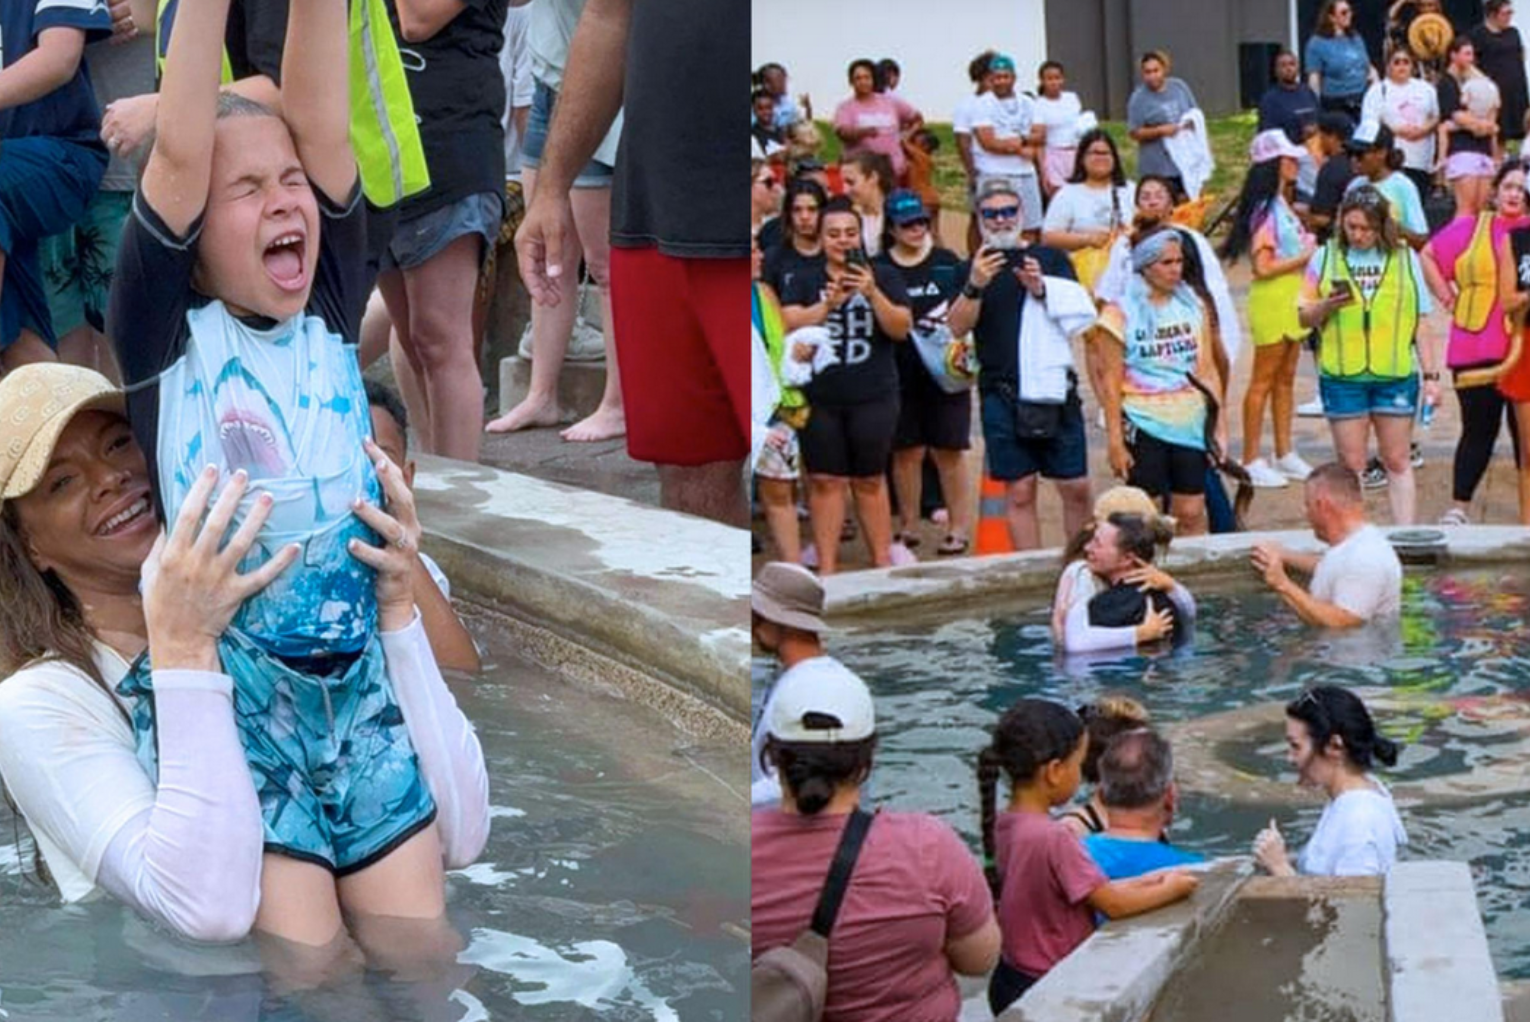 Revival is Stirring as ‘Hundreds and Hundreds’ Get Baptized in Texas Fountain